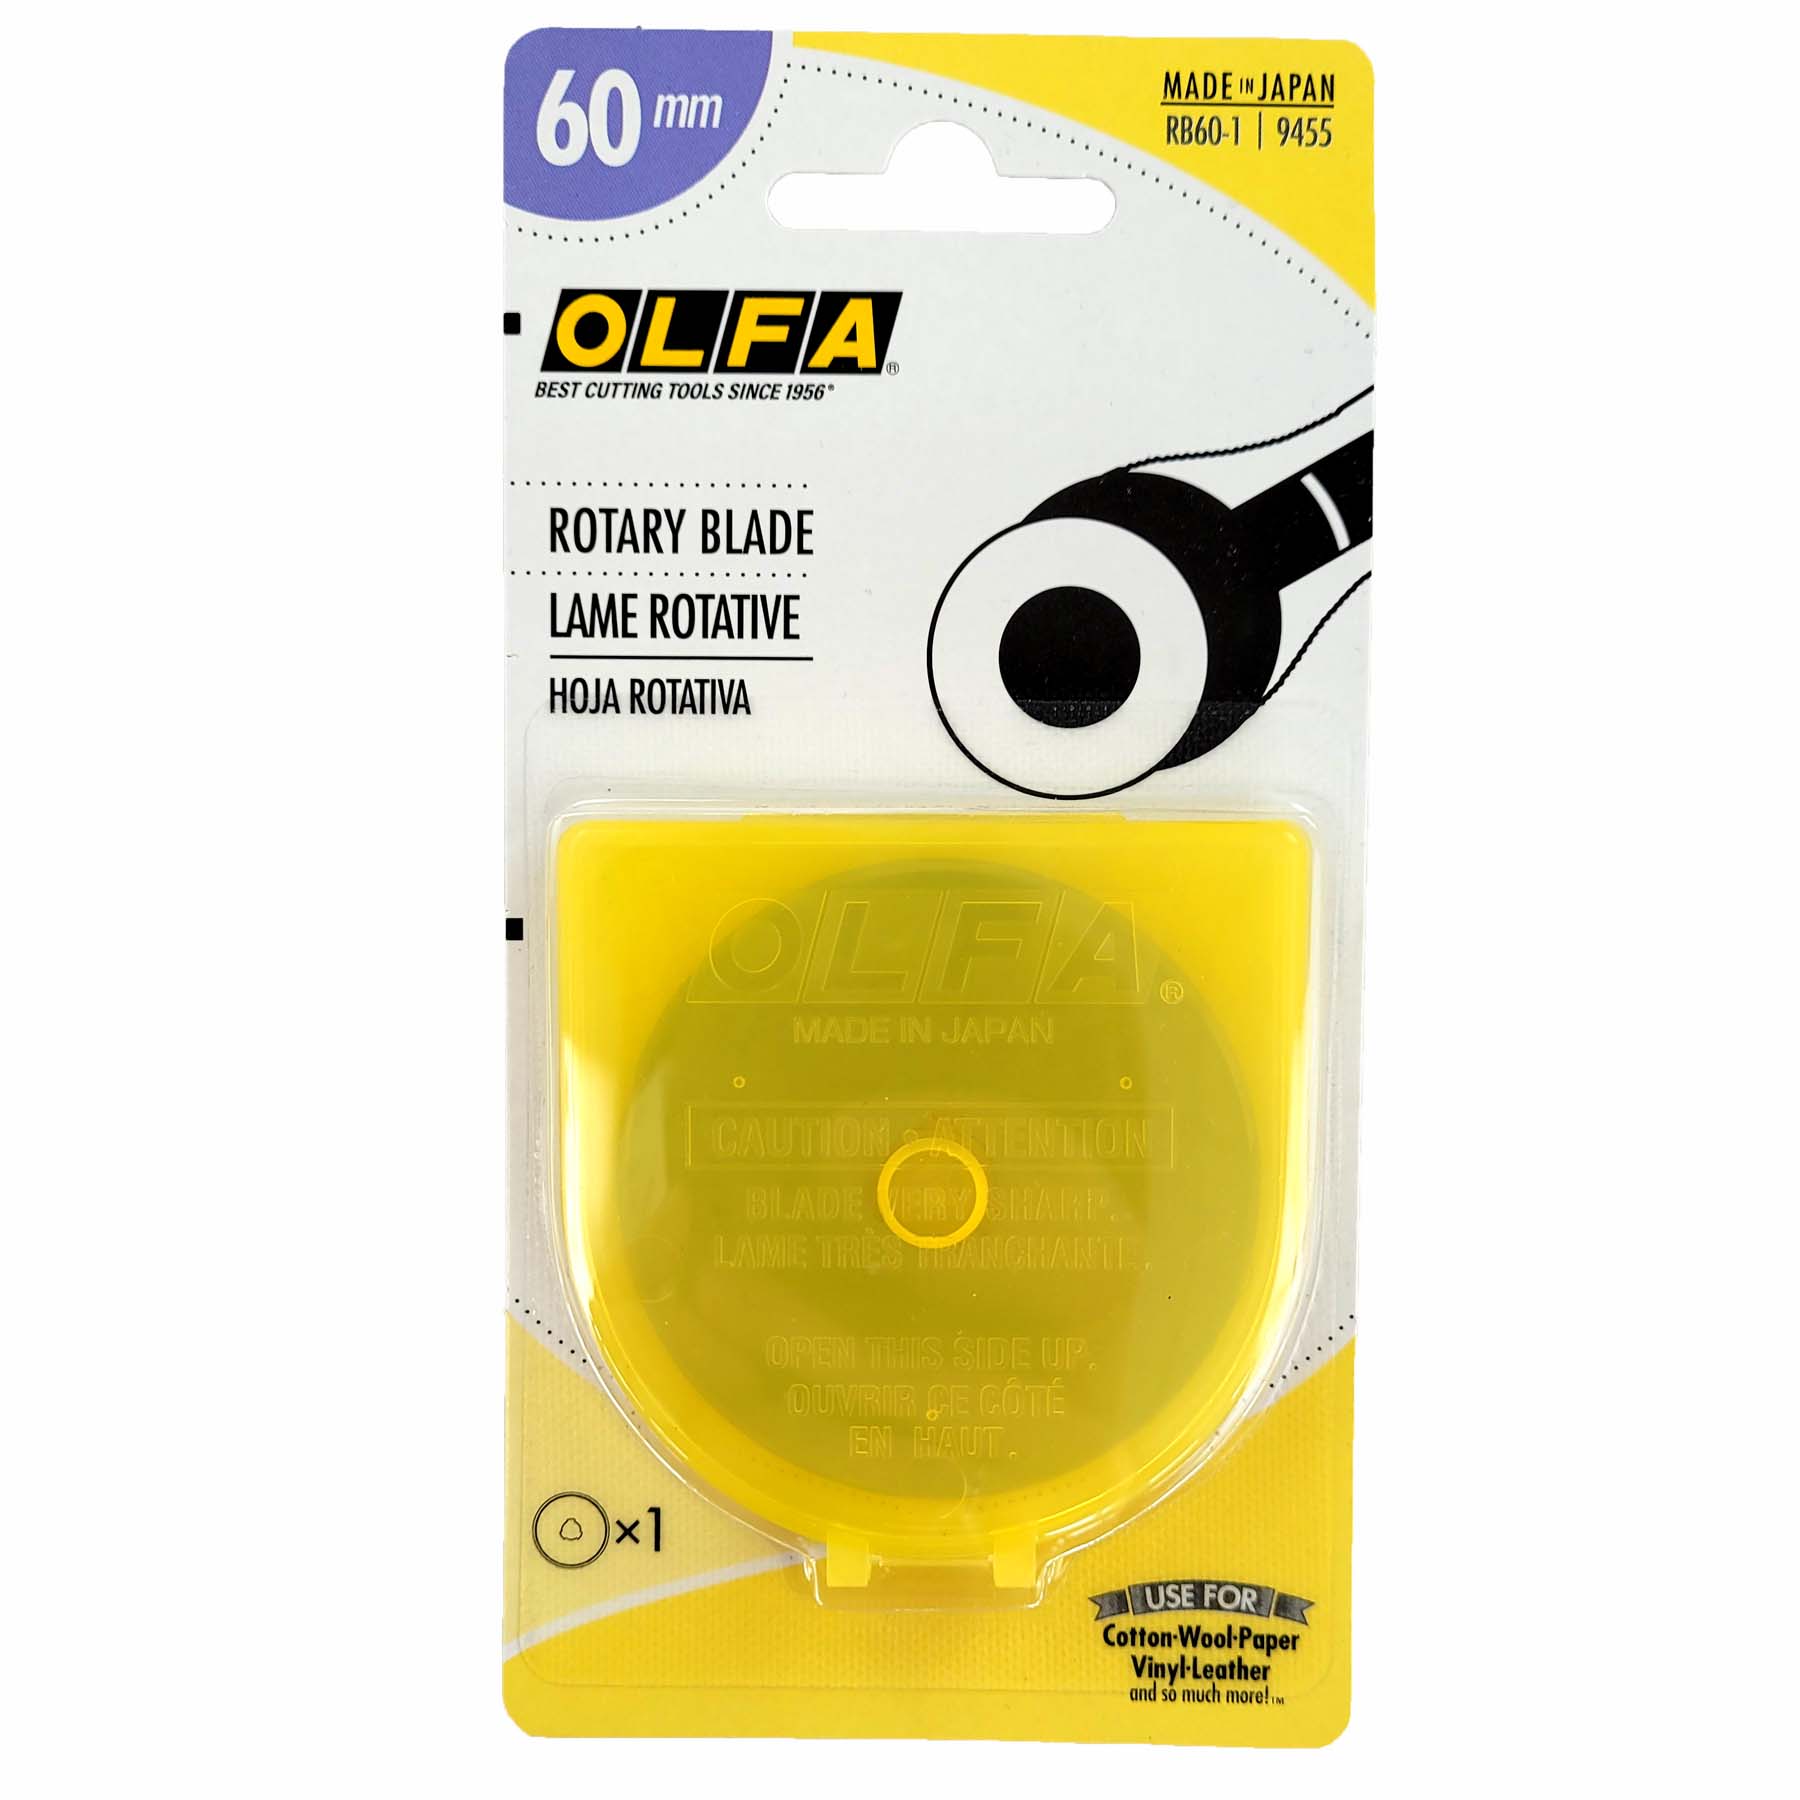 Olfa 60mm Replacement Blade for Rotary Cutter